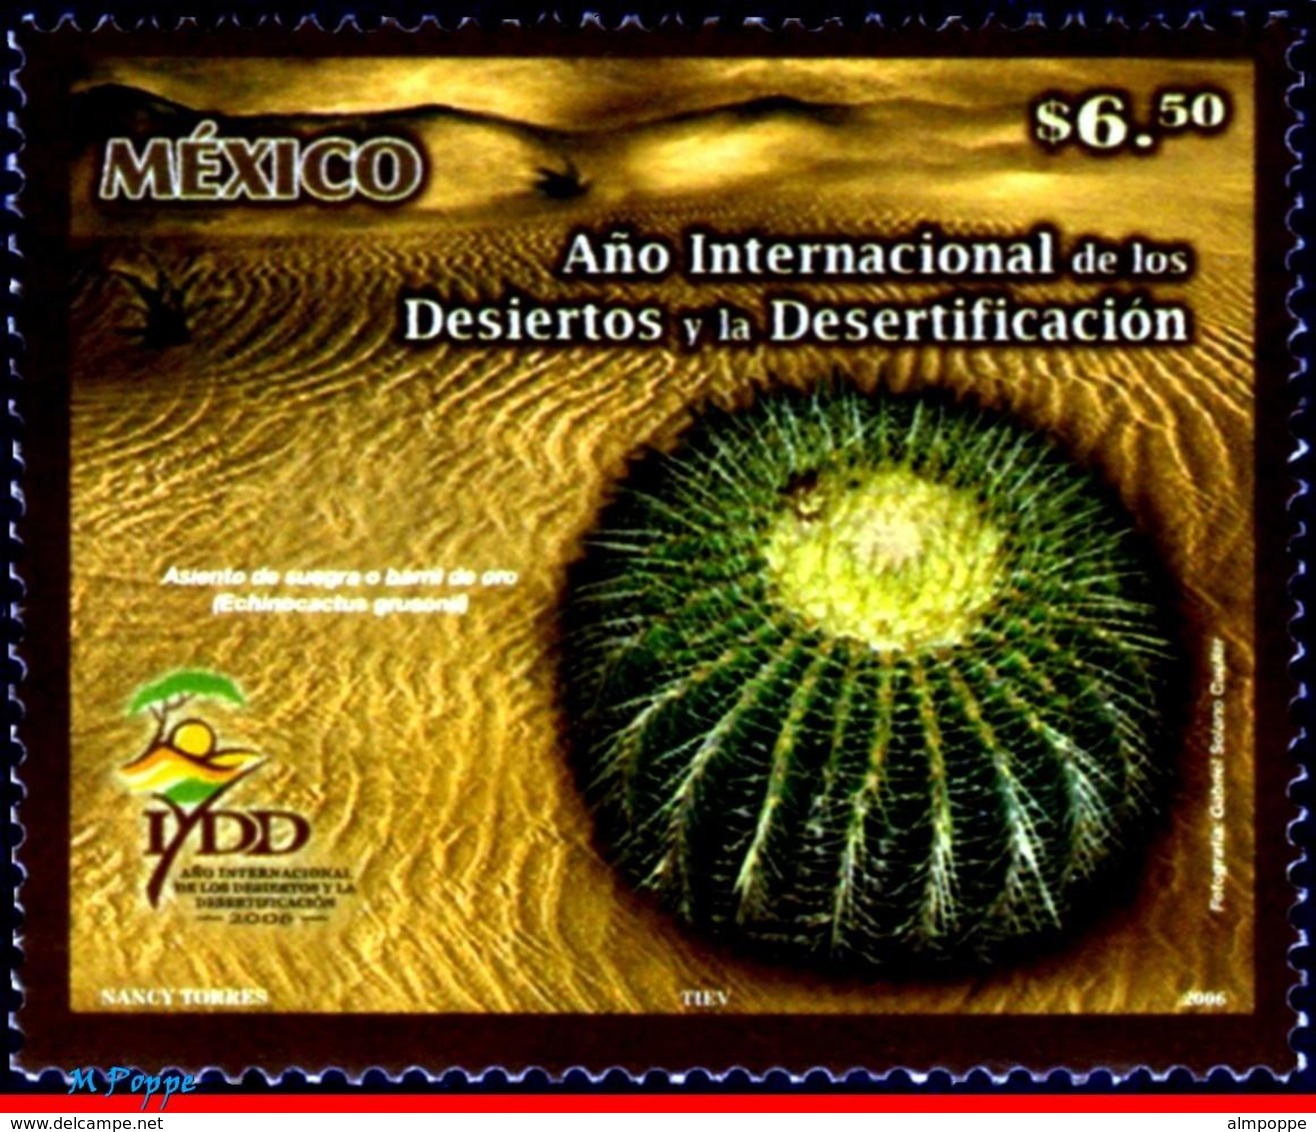 Ref. MX-2523 MEXICO 2006 FLOWERS, PLANTS, INTL.YEAR OF DESERTS AND, DESERTIFICATION, CACTUS, MNH 1V Sc# 2523 - Mexiko